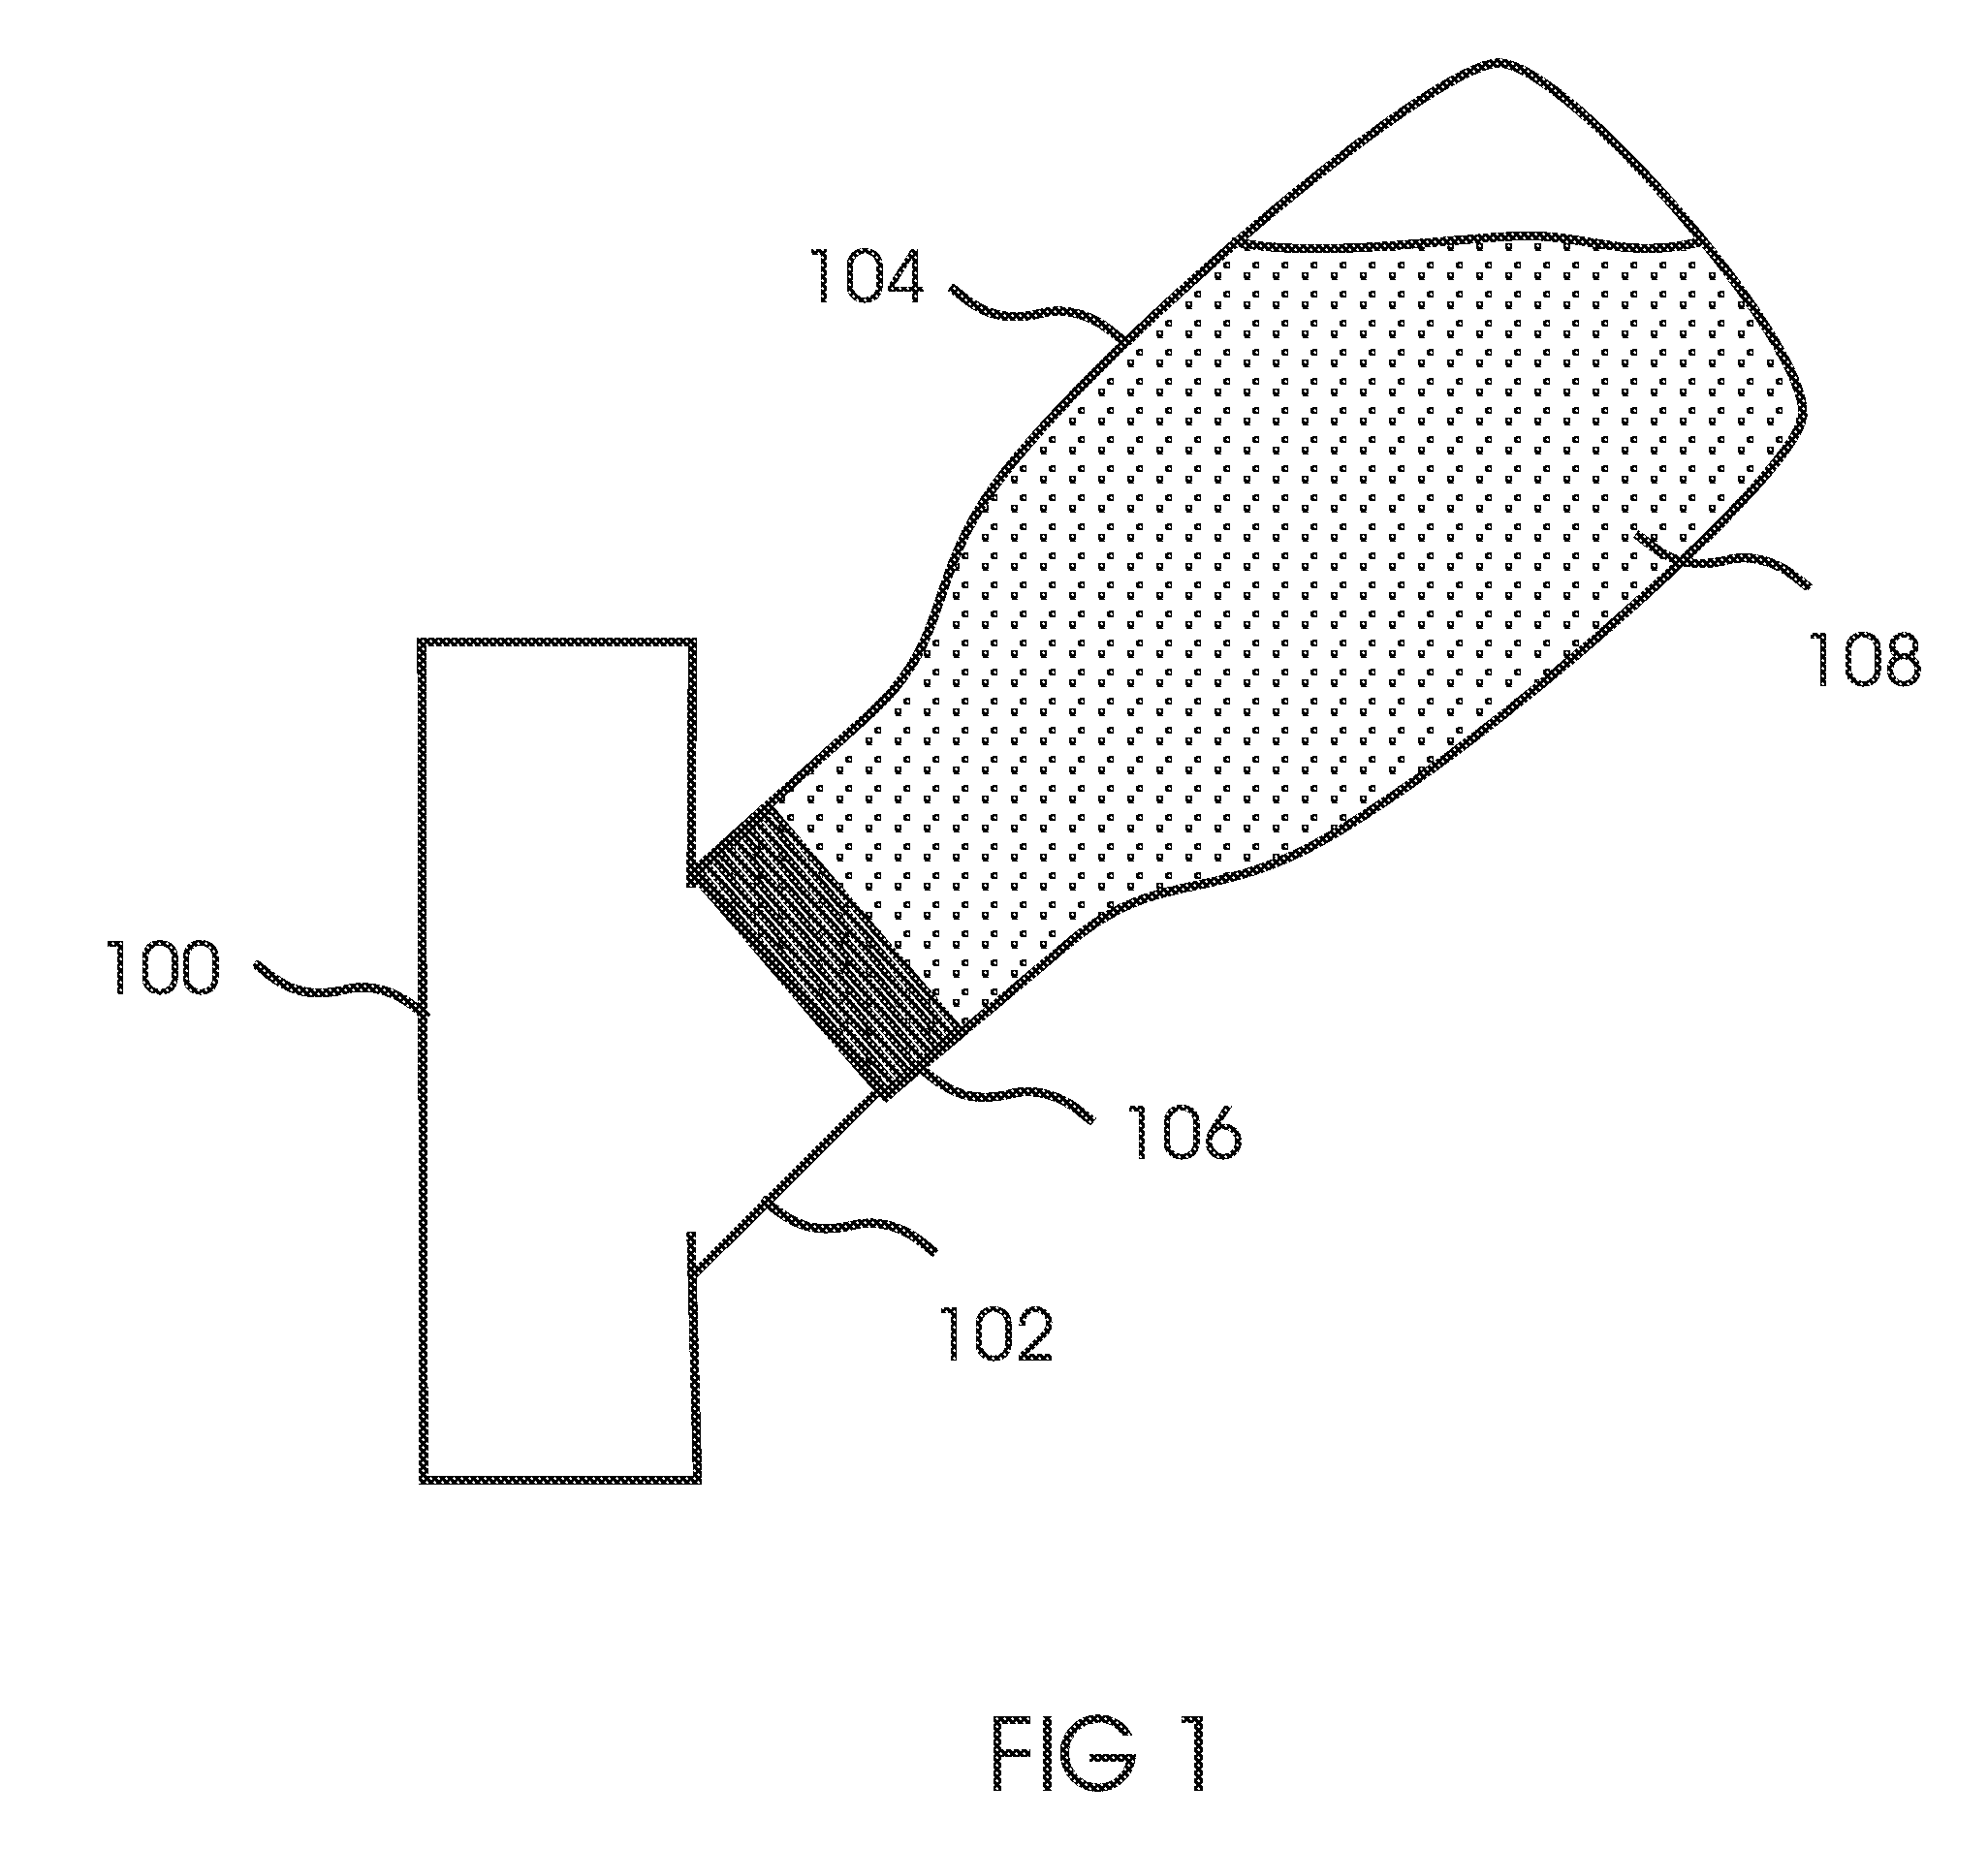 Liquid Fertilizer, Weed Killer, and Pesticide Application Device Using Exchangeable Containers Connected to an Irrigation System